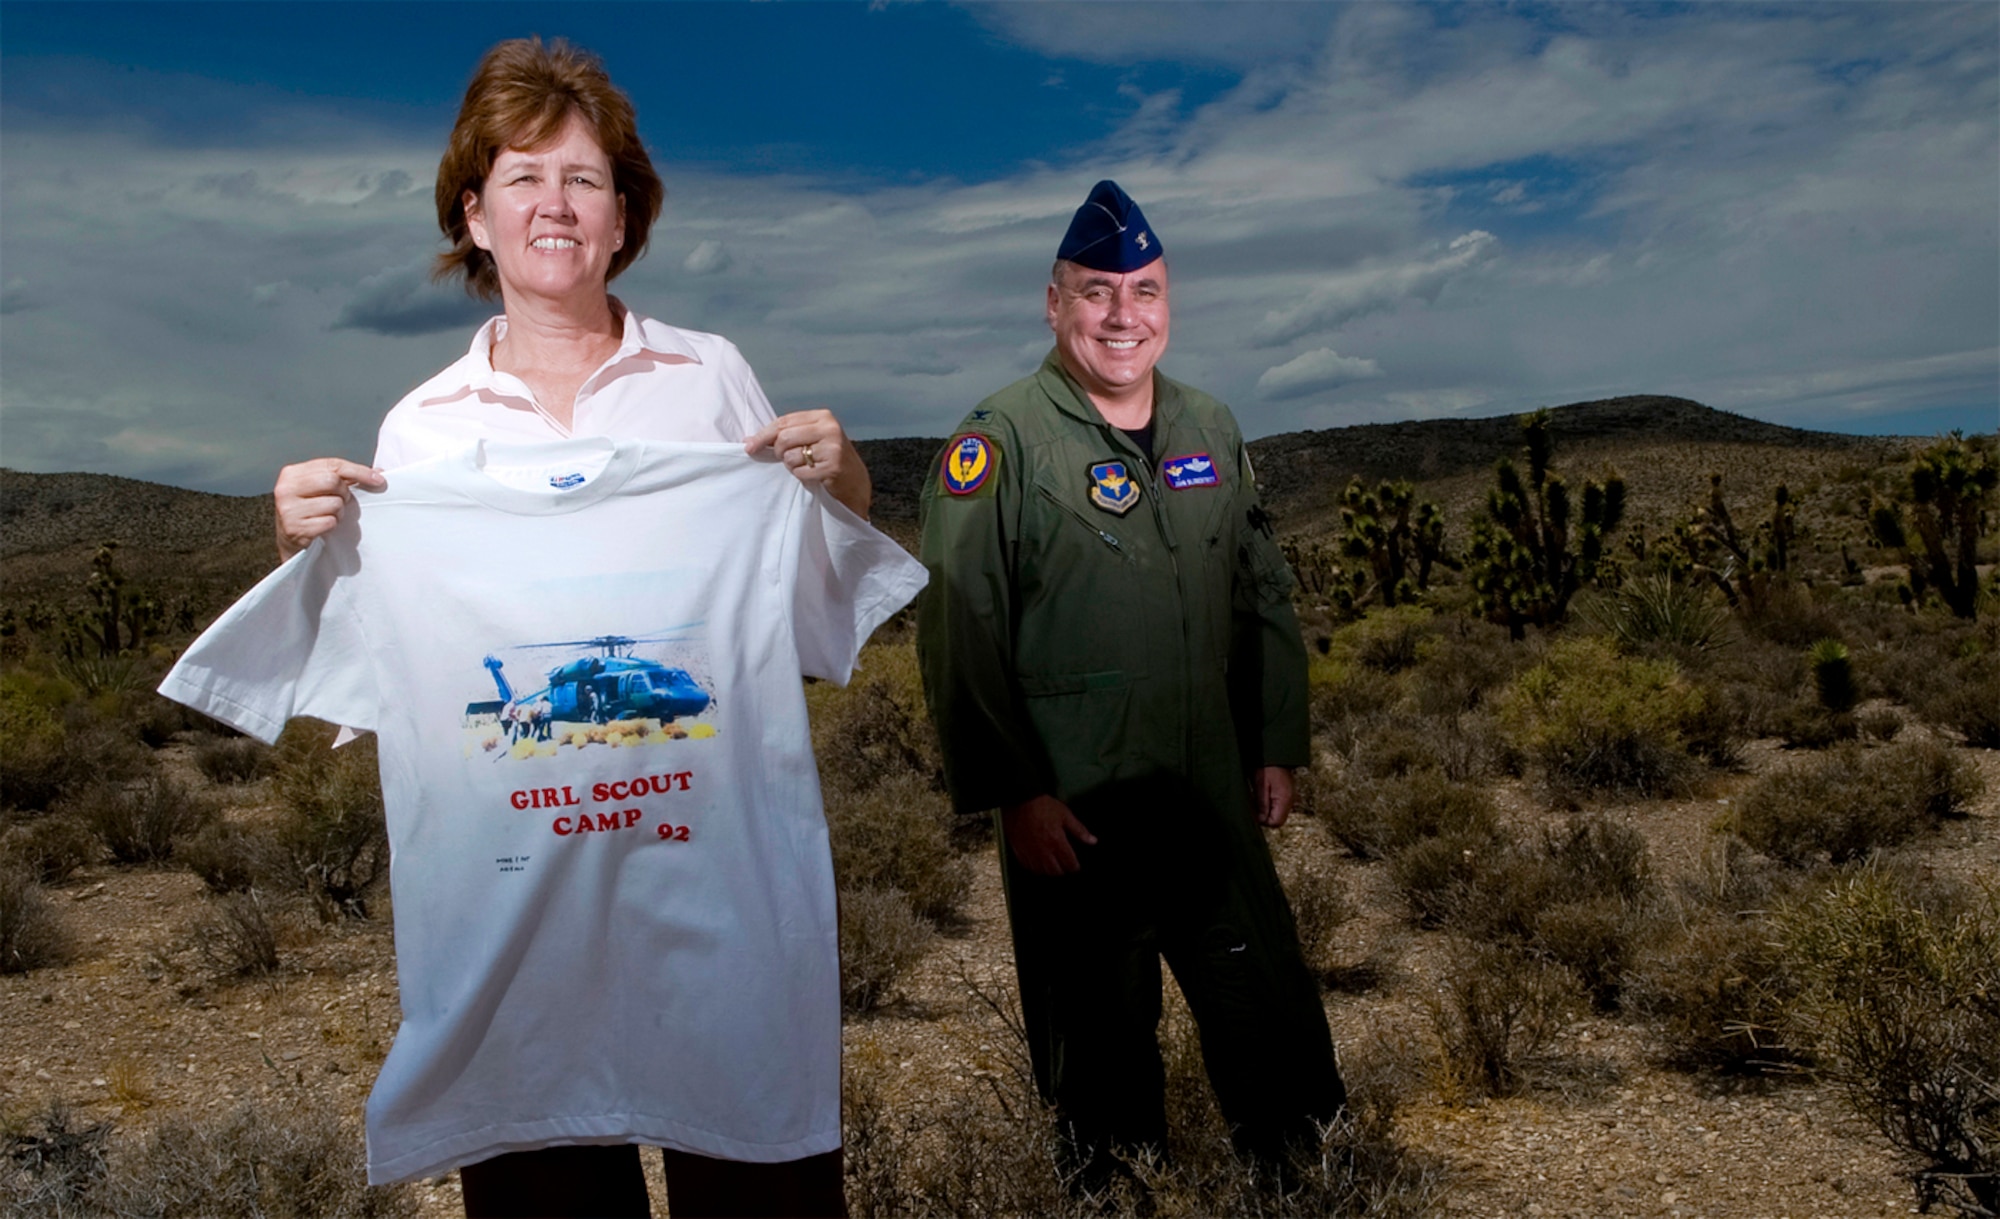 DISASTER IN THE DESERT - Elaine Hardy displays a T-shirt that friends gave to her while she recovered in the hospital. The shirt includes a picture of emergency workers loading her onto the HH-60G. Col. John Blumentritt was one of the pilots on that flight. (U.S. Air Force photo by / Staff Sgt. Bennie J. Davis III)